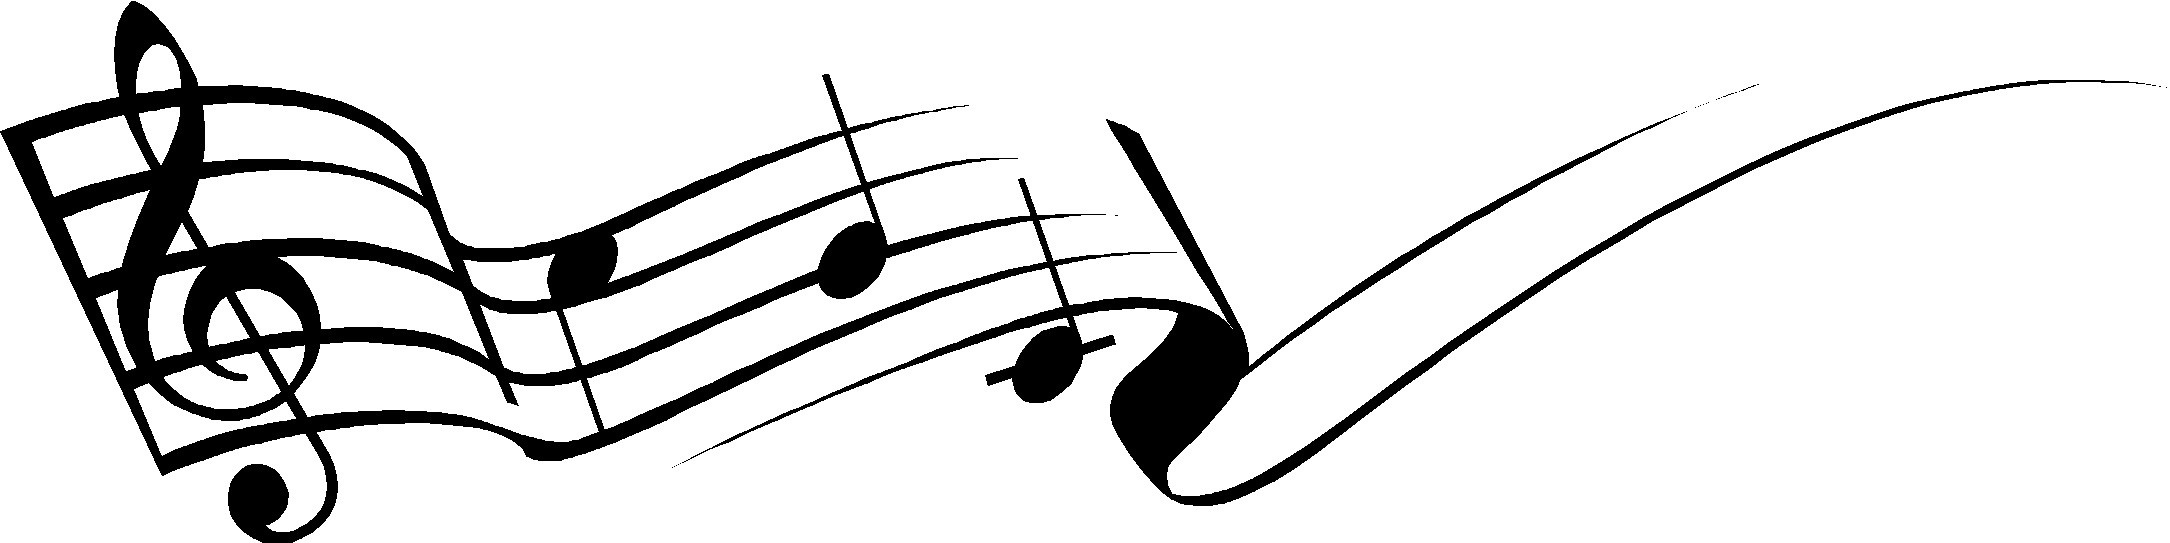 Music Background Clipart